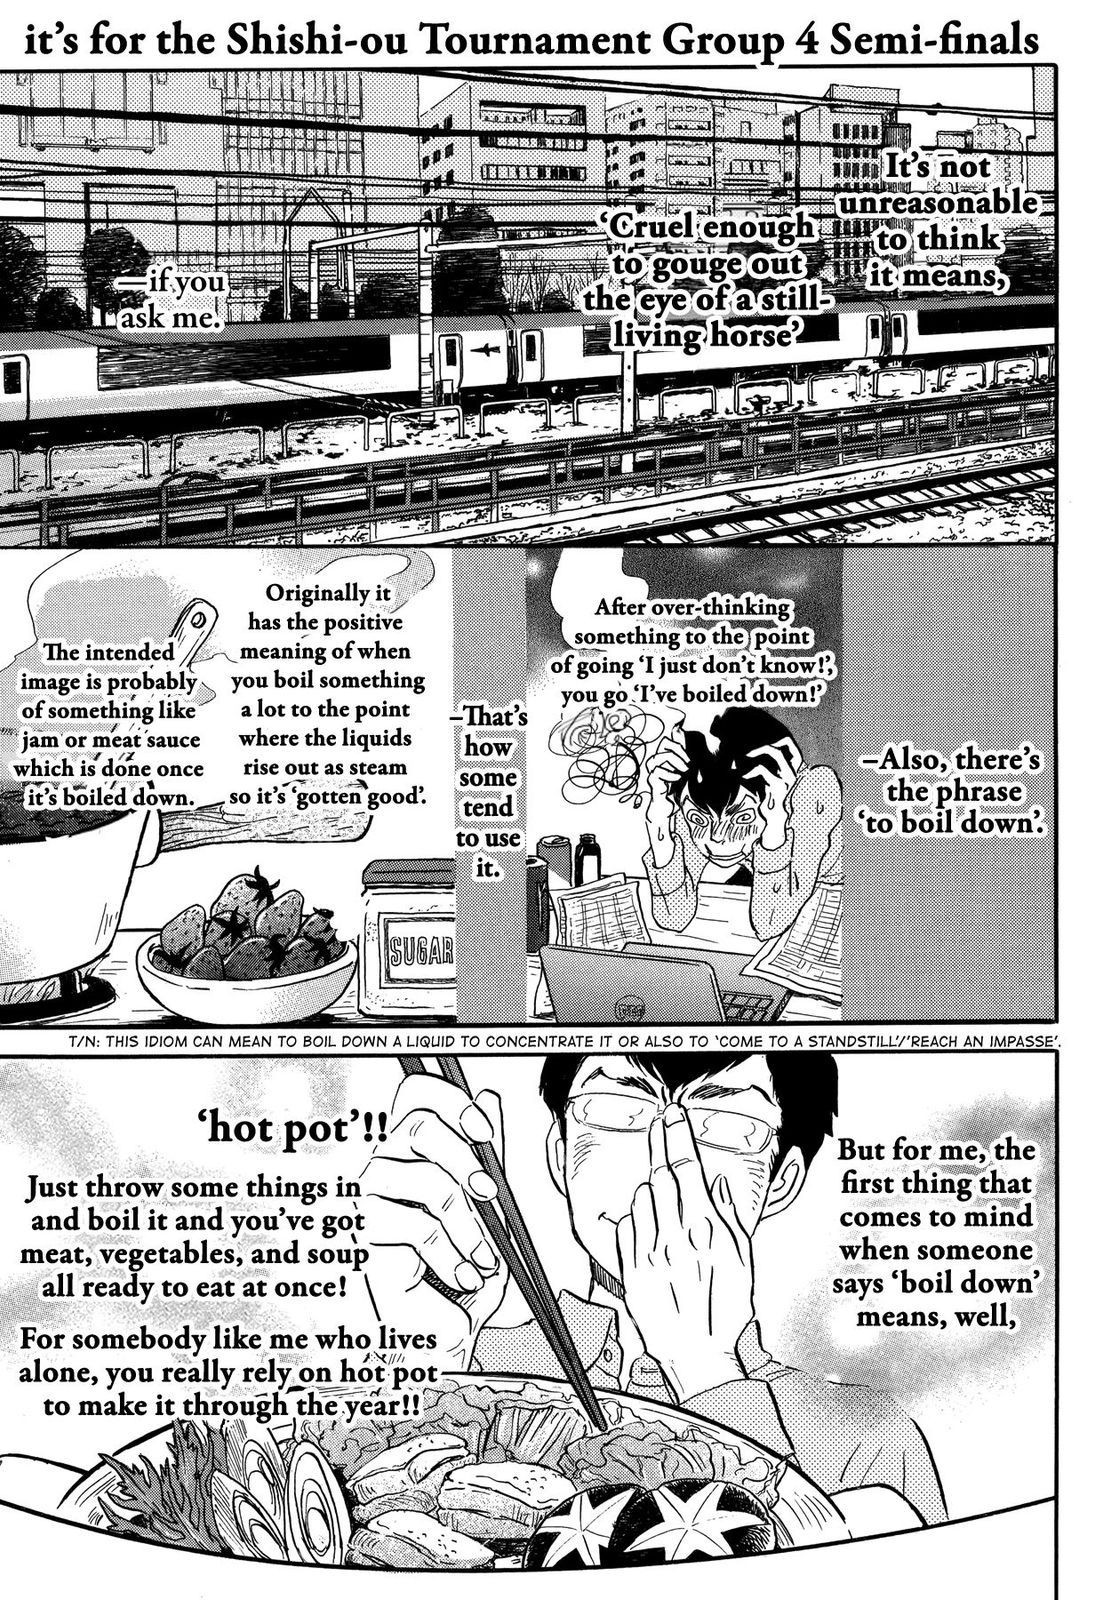 March Comes in Like a Lion, Chapter 156 Azusa Number 1 (Part 1) (EN) image 03